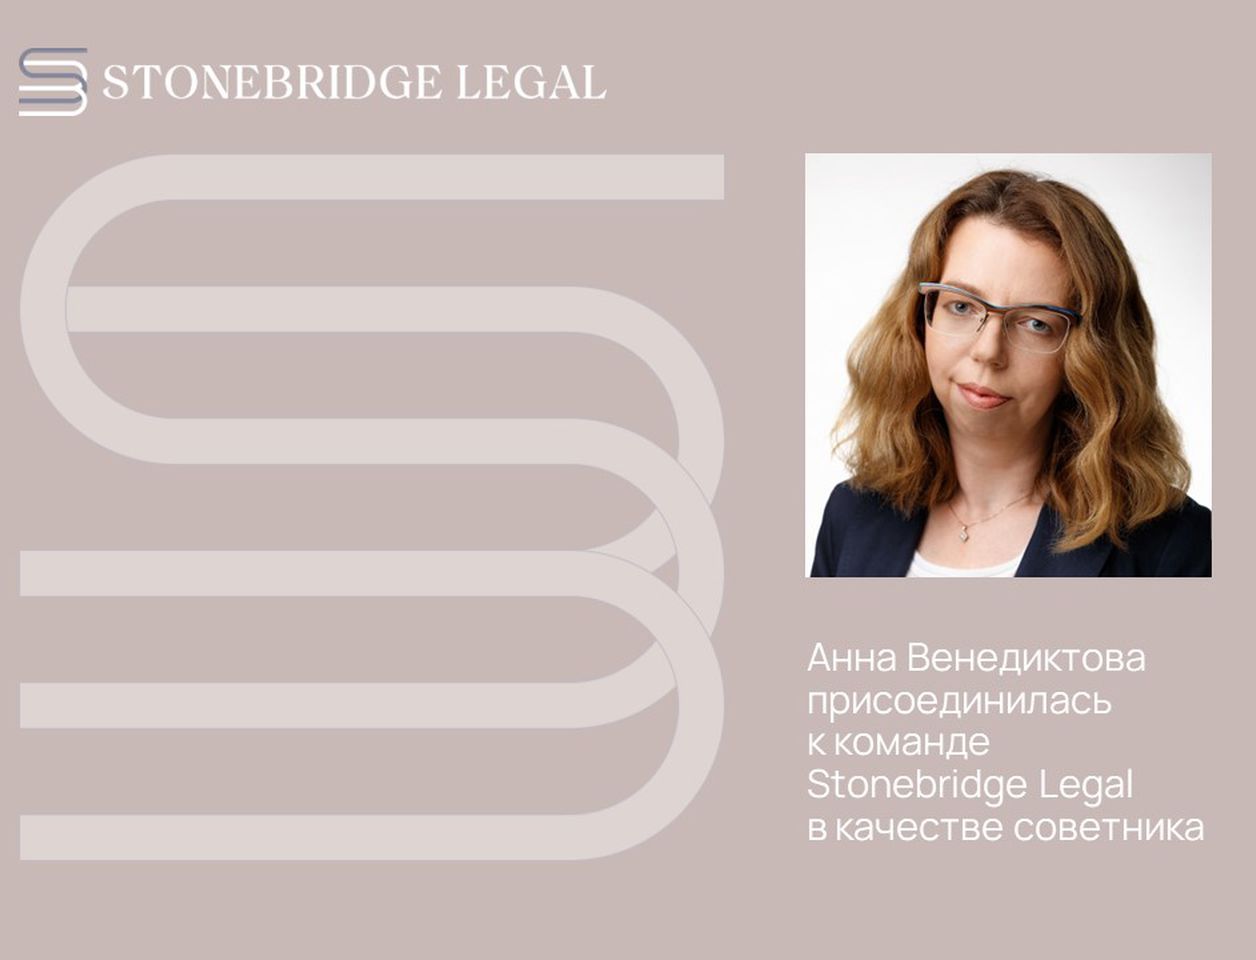 Stonebridge Legal further strengthens M&A and project finance practices